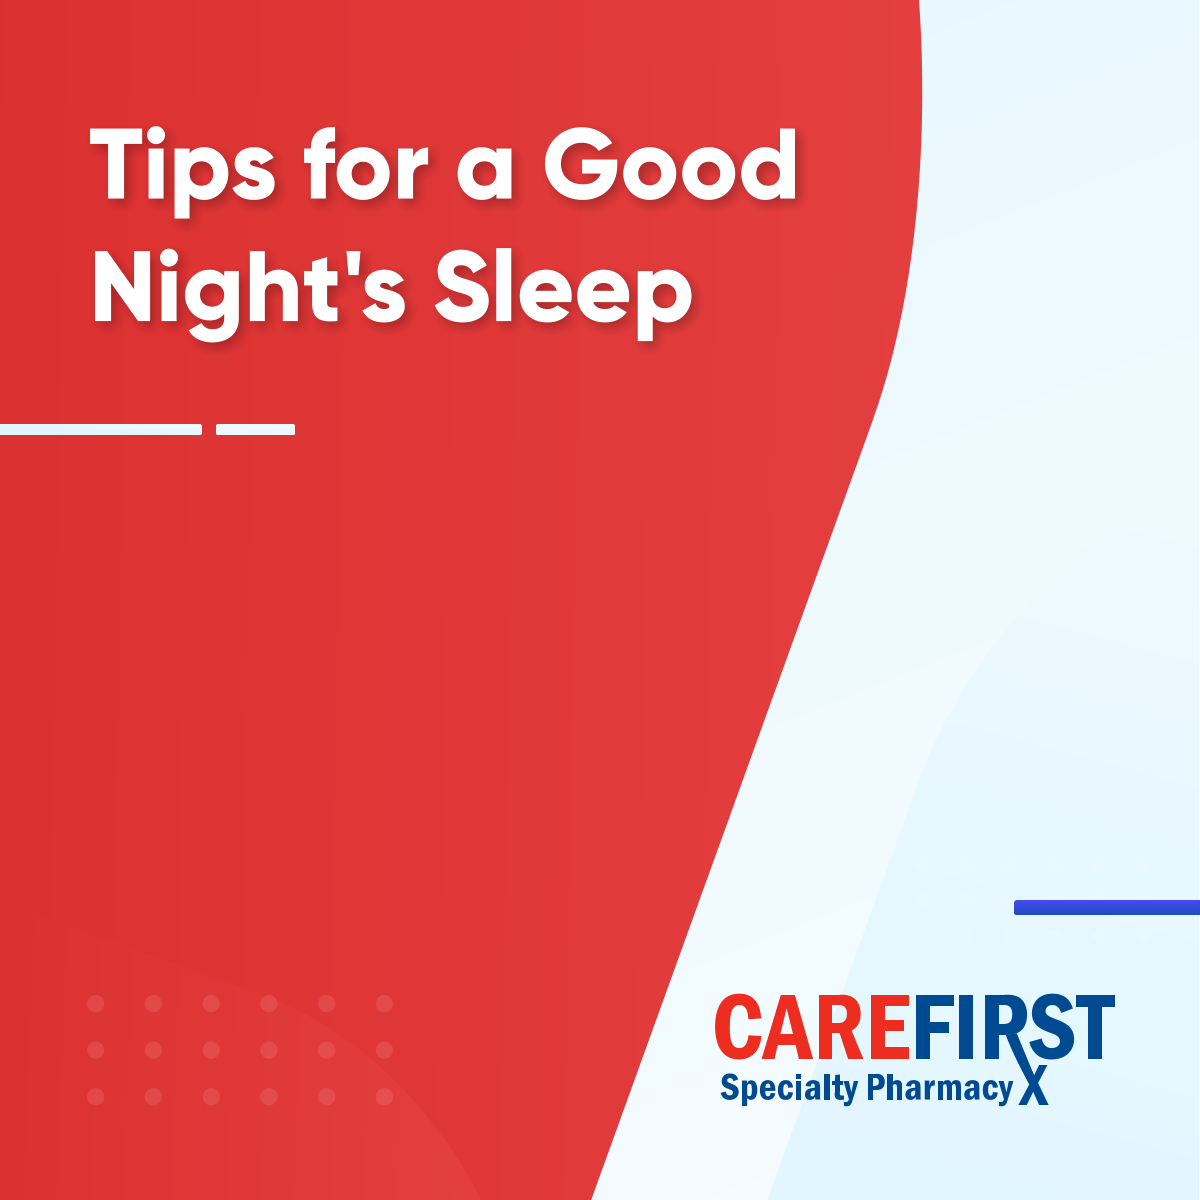 Get a good night's sleep with these simple tips: stick to a consistent sleep schedule, create a relaxing sleep environment, and limit screen time before bed.

#CharlotteNC #SleepSchedule #SleepEnvironment #GoodNightSleep #Tips #Pharmacy